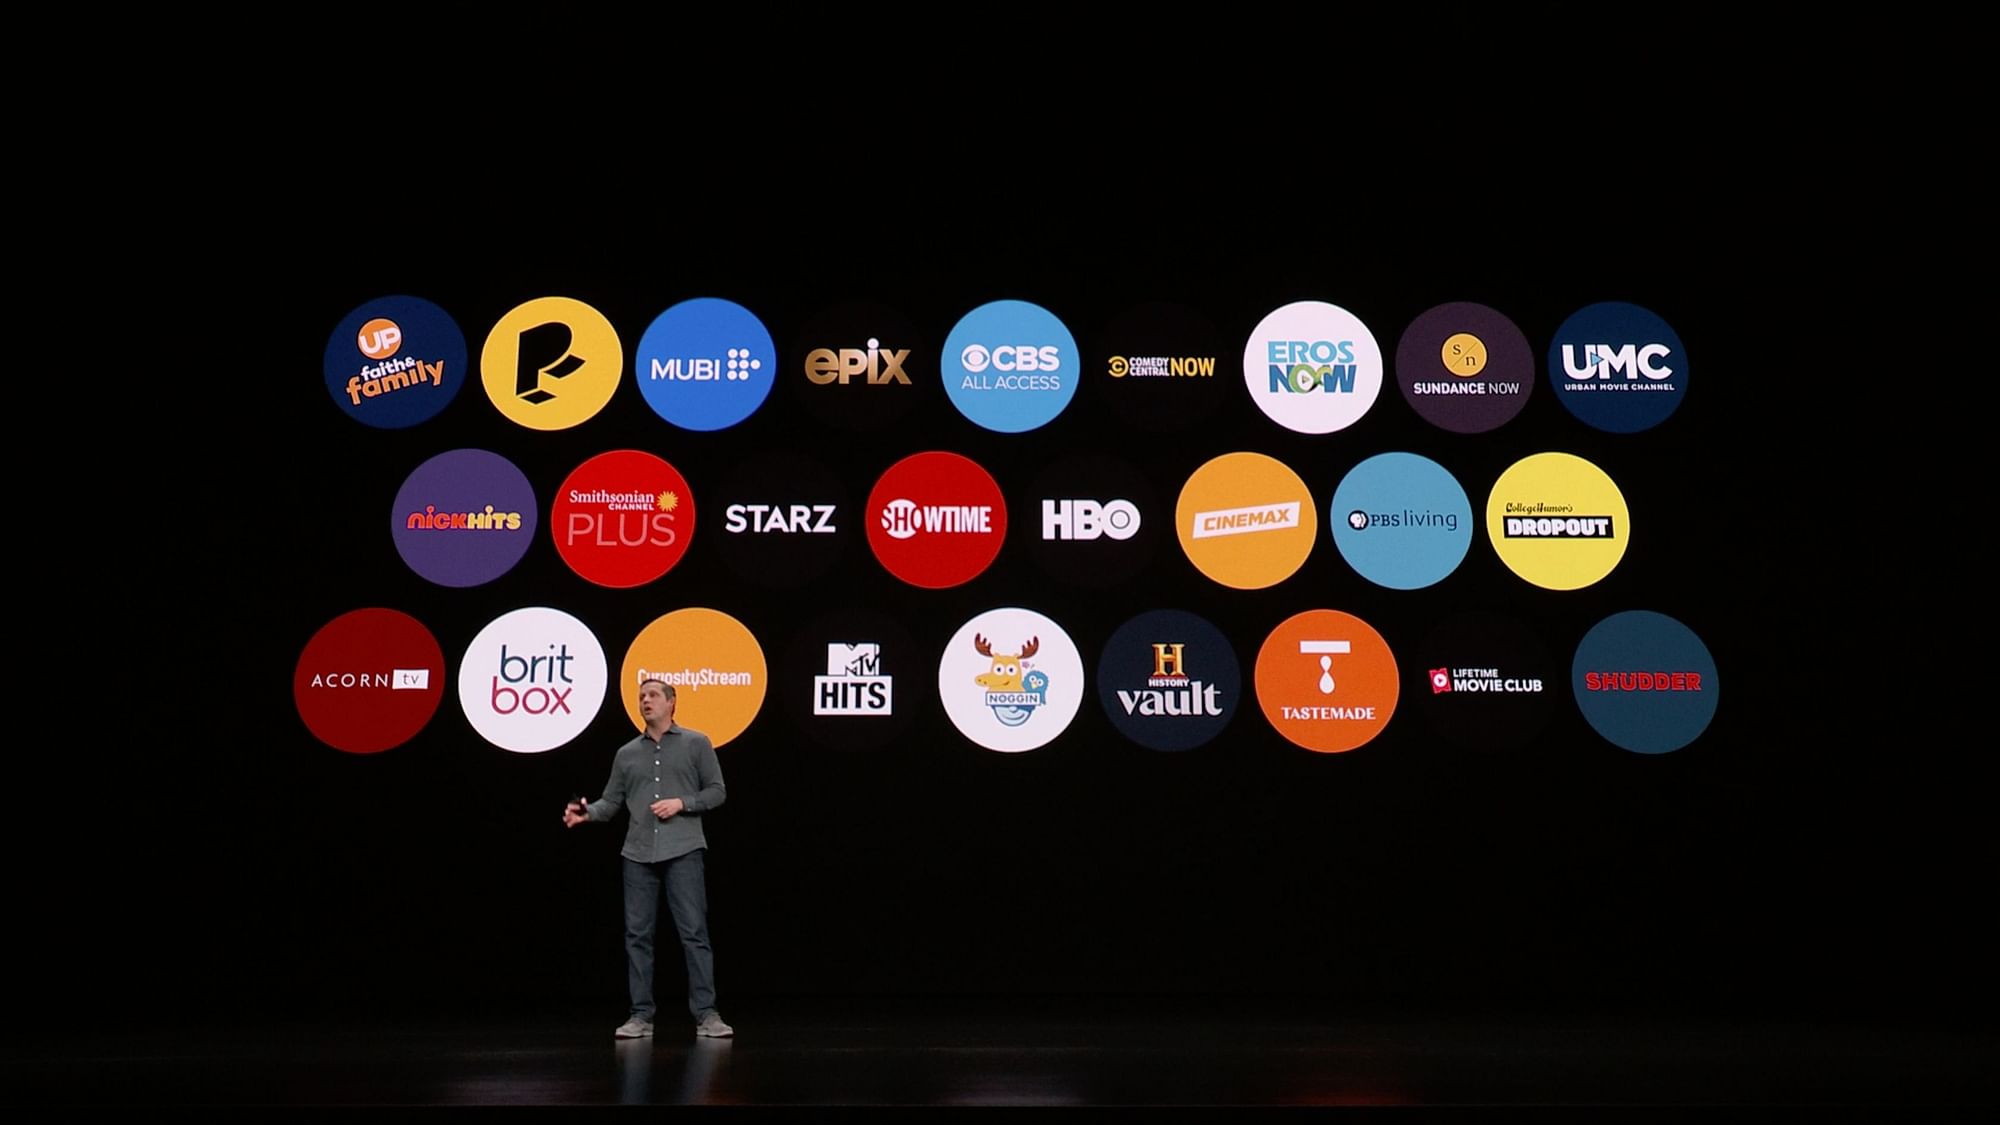 Apple TV Plus content will be available on Amazon Prime as well.